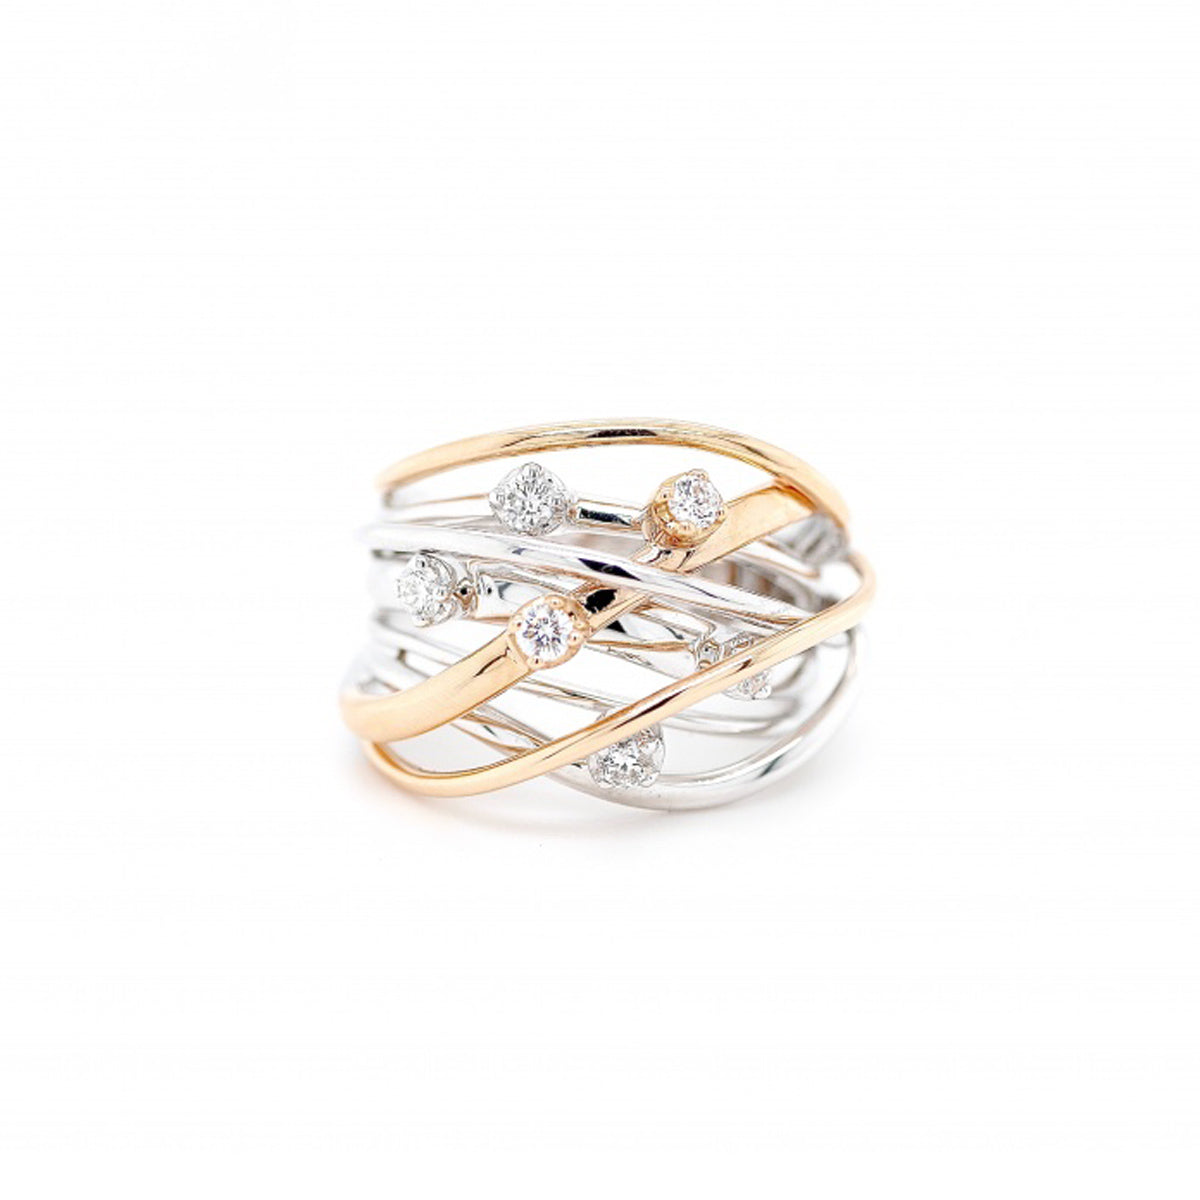 18ct White and Rose Gold Diamond Crossover Ring